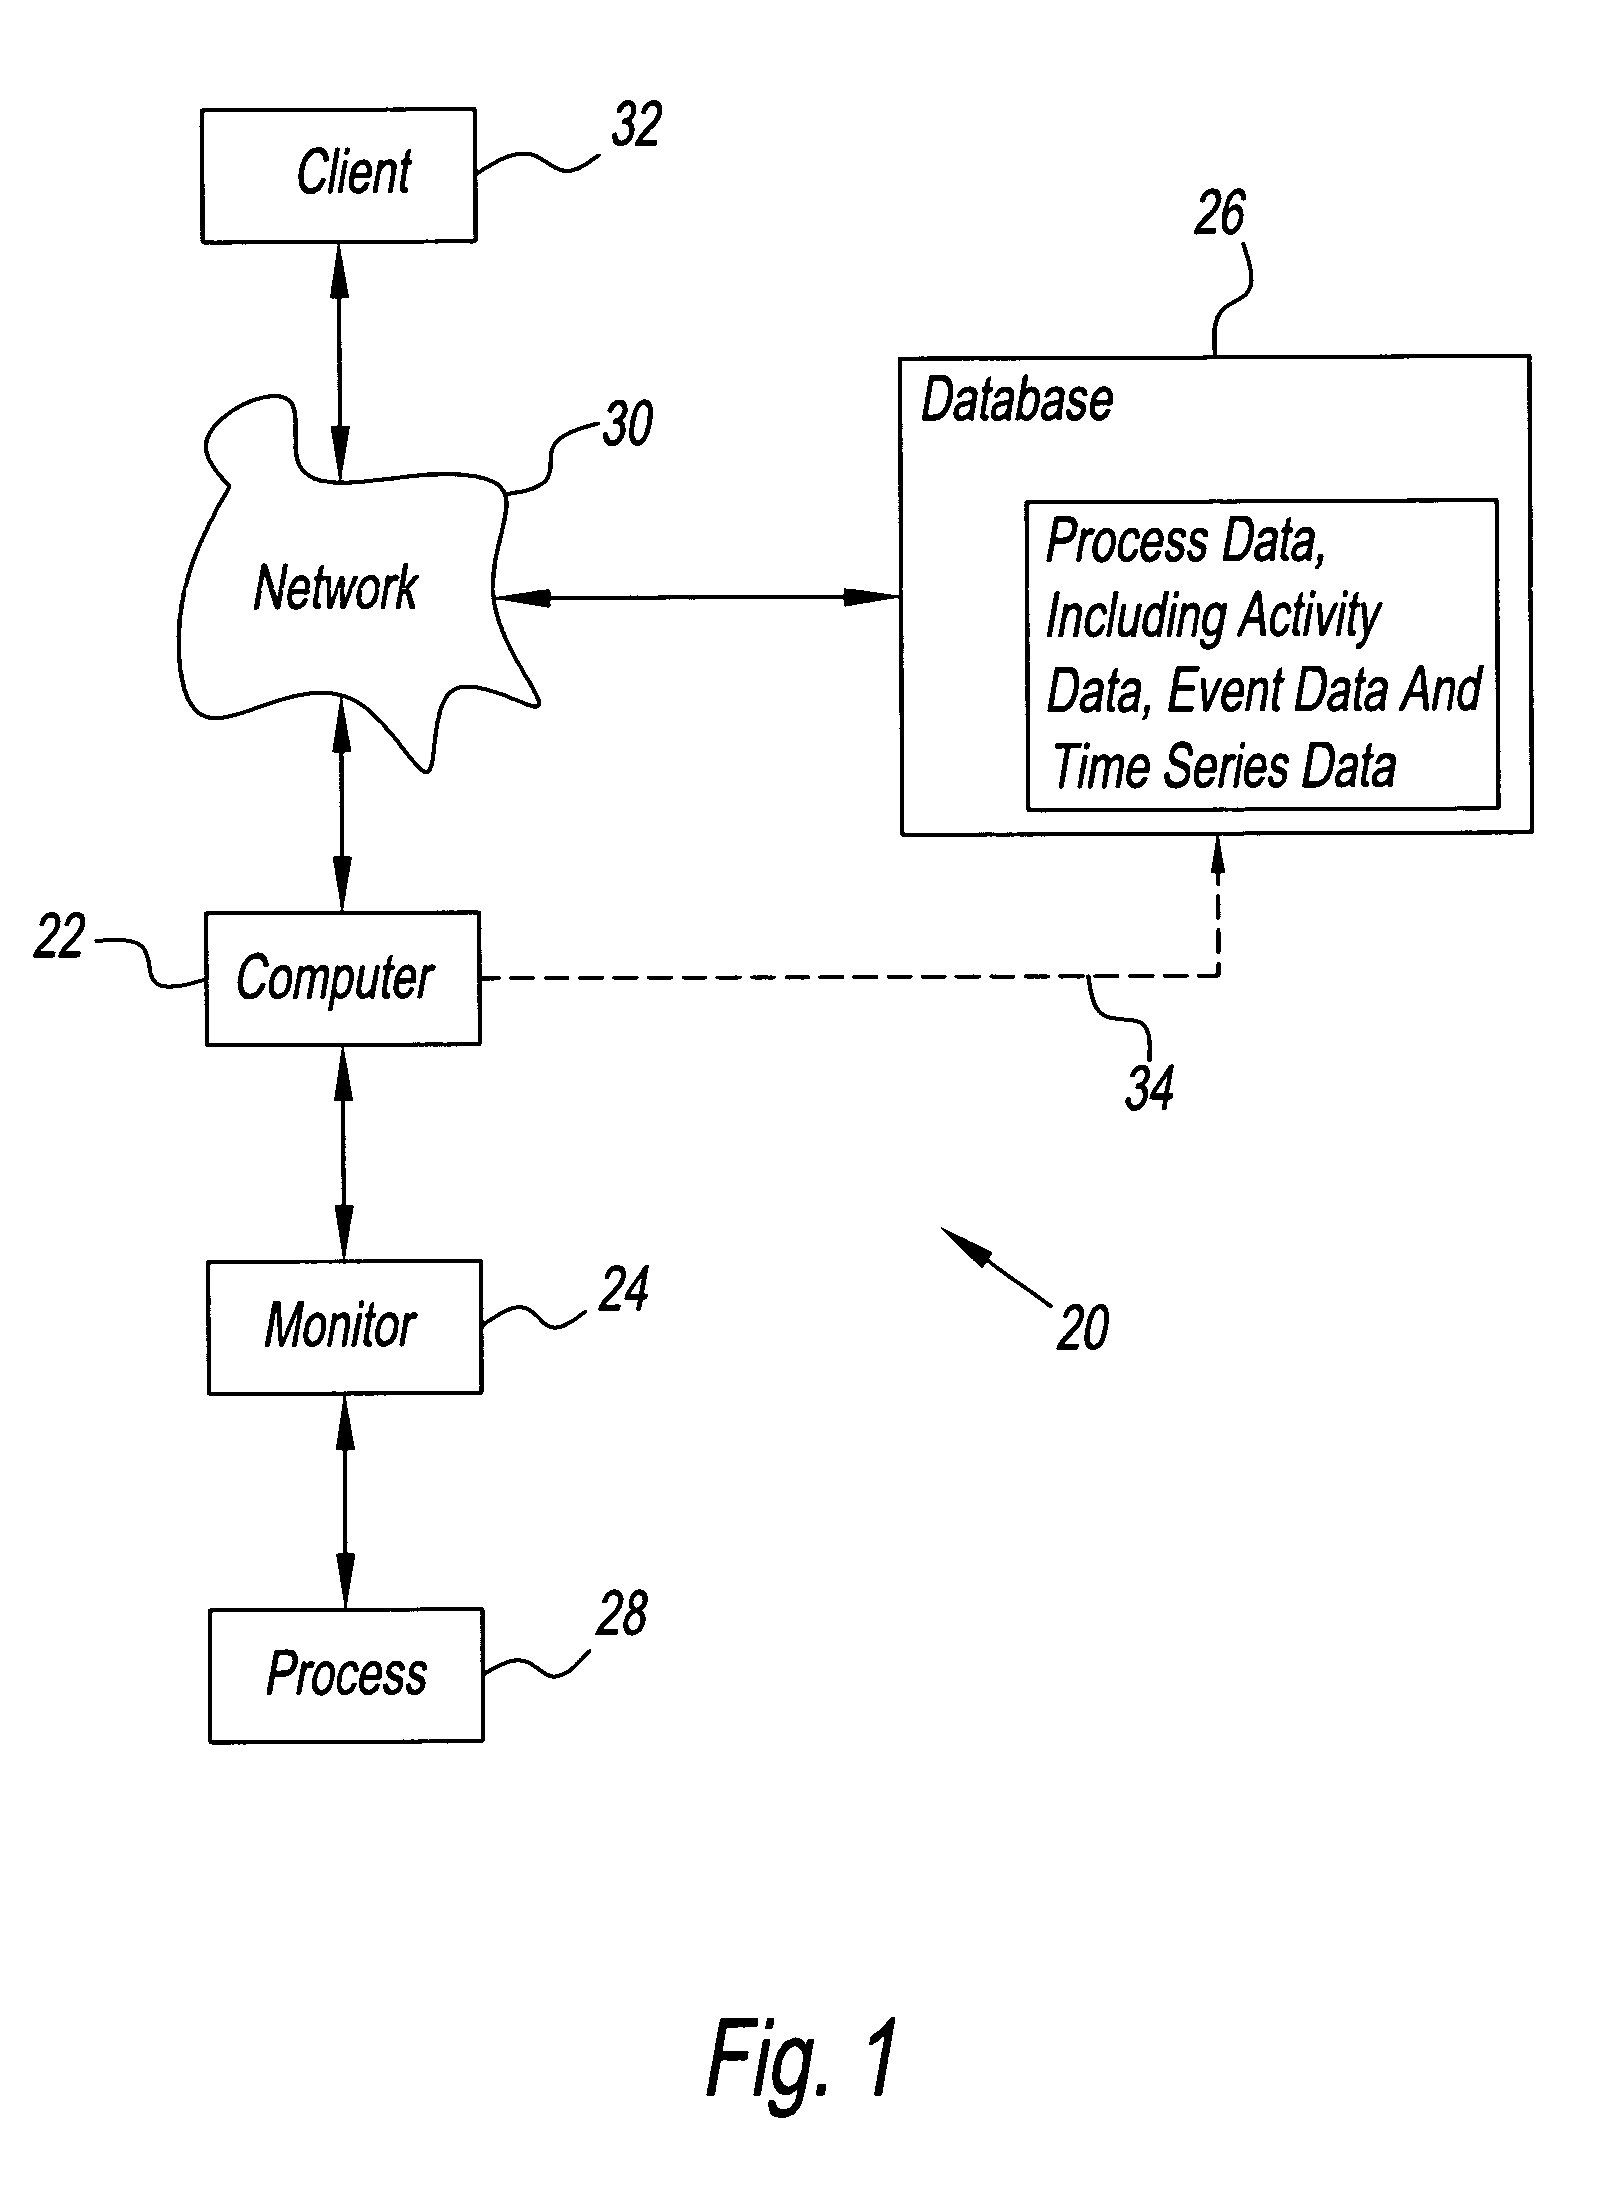 Method and system for capturing, storing and retrieving events and activities